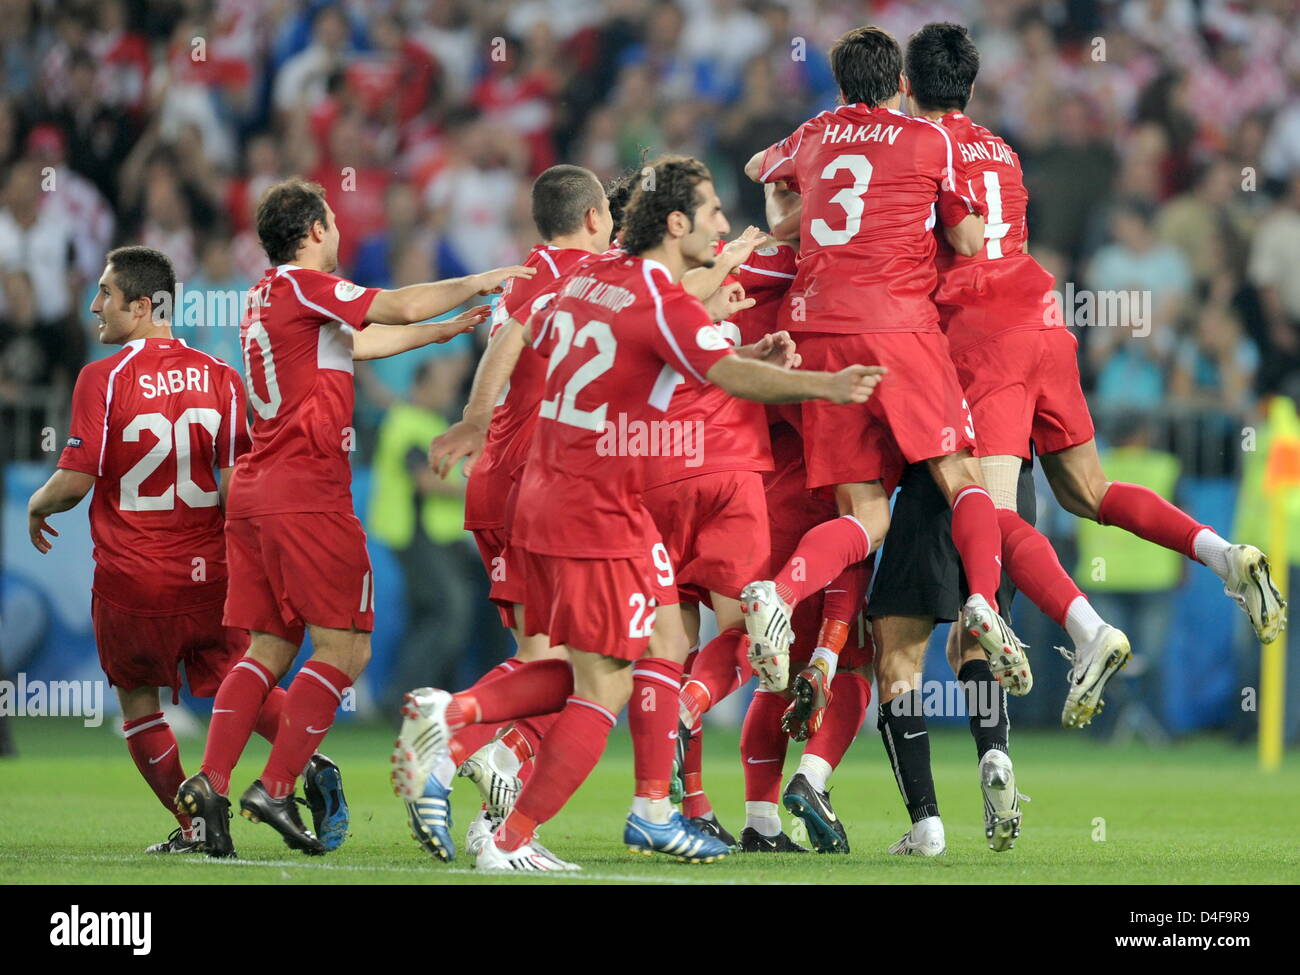 Hamit Altintop of Turkey (C) jubilates with his teammates after the UEFA EURO 2008 quarter final match between Croatia and Turkey at the Ernst Happel stadium in Vienna, Austria, 20 June 2008. Turkey won 1:3 in penalty shootout. Photo: Achim Scheidemann dpa +please note UEFA restrictions particulary in regard to slide shows and 'No Mobile Services'+ +++(c) dpa - Bildfunk+++ Stock Photo